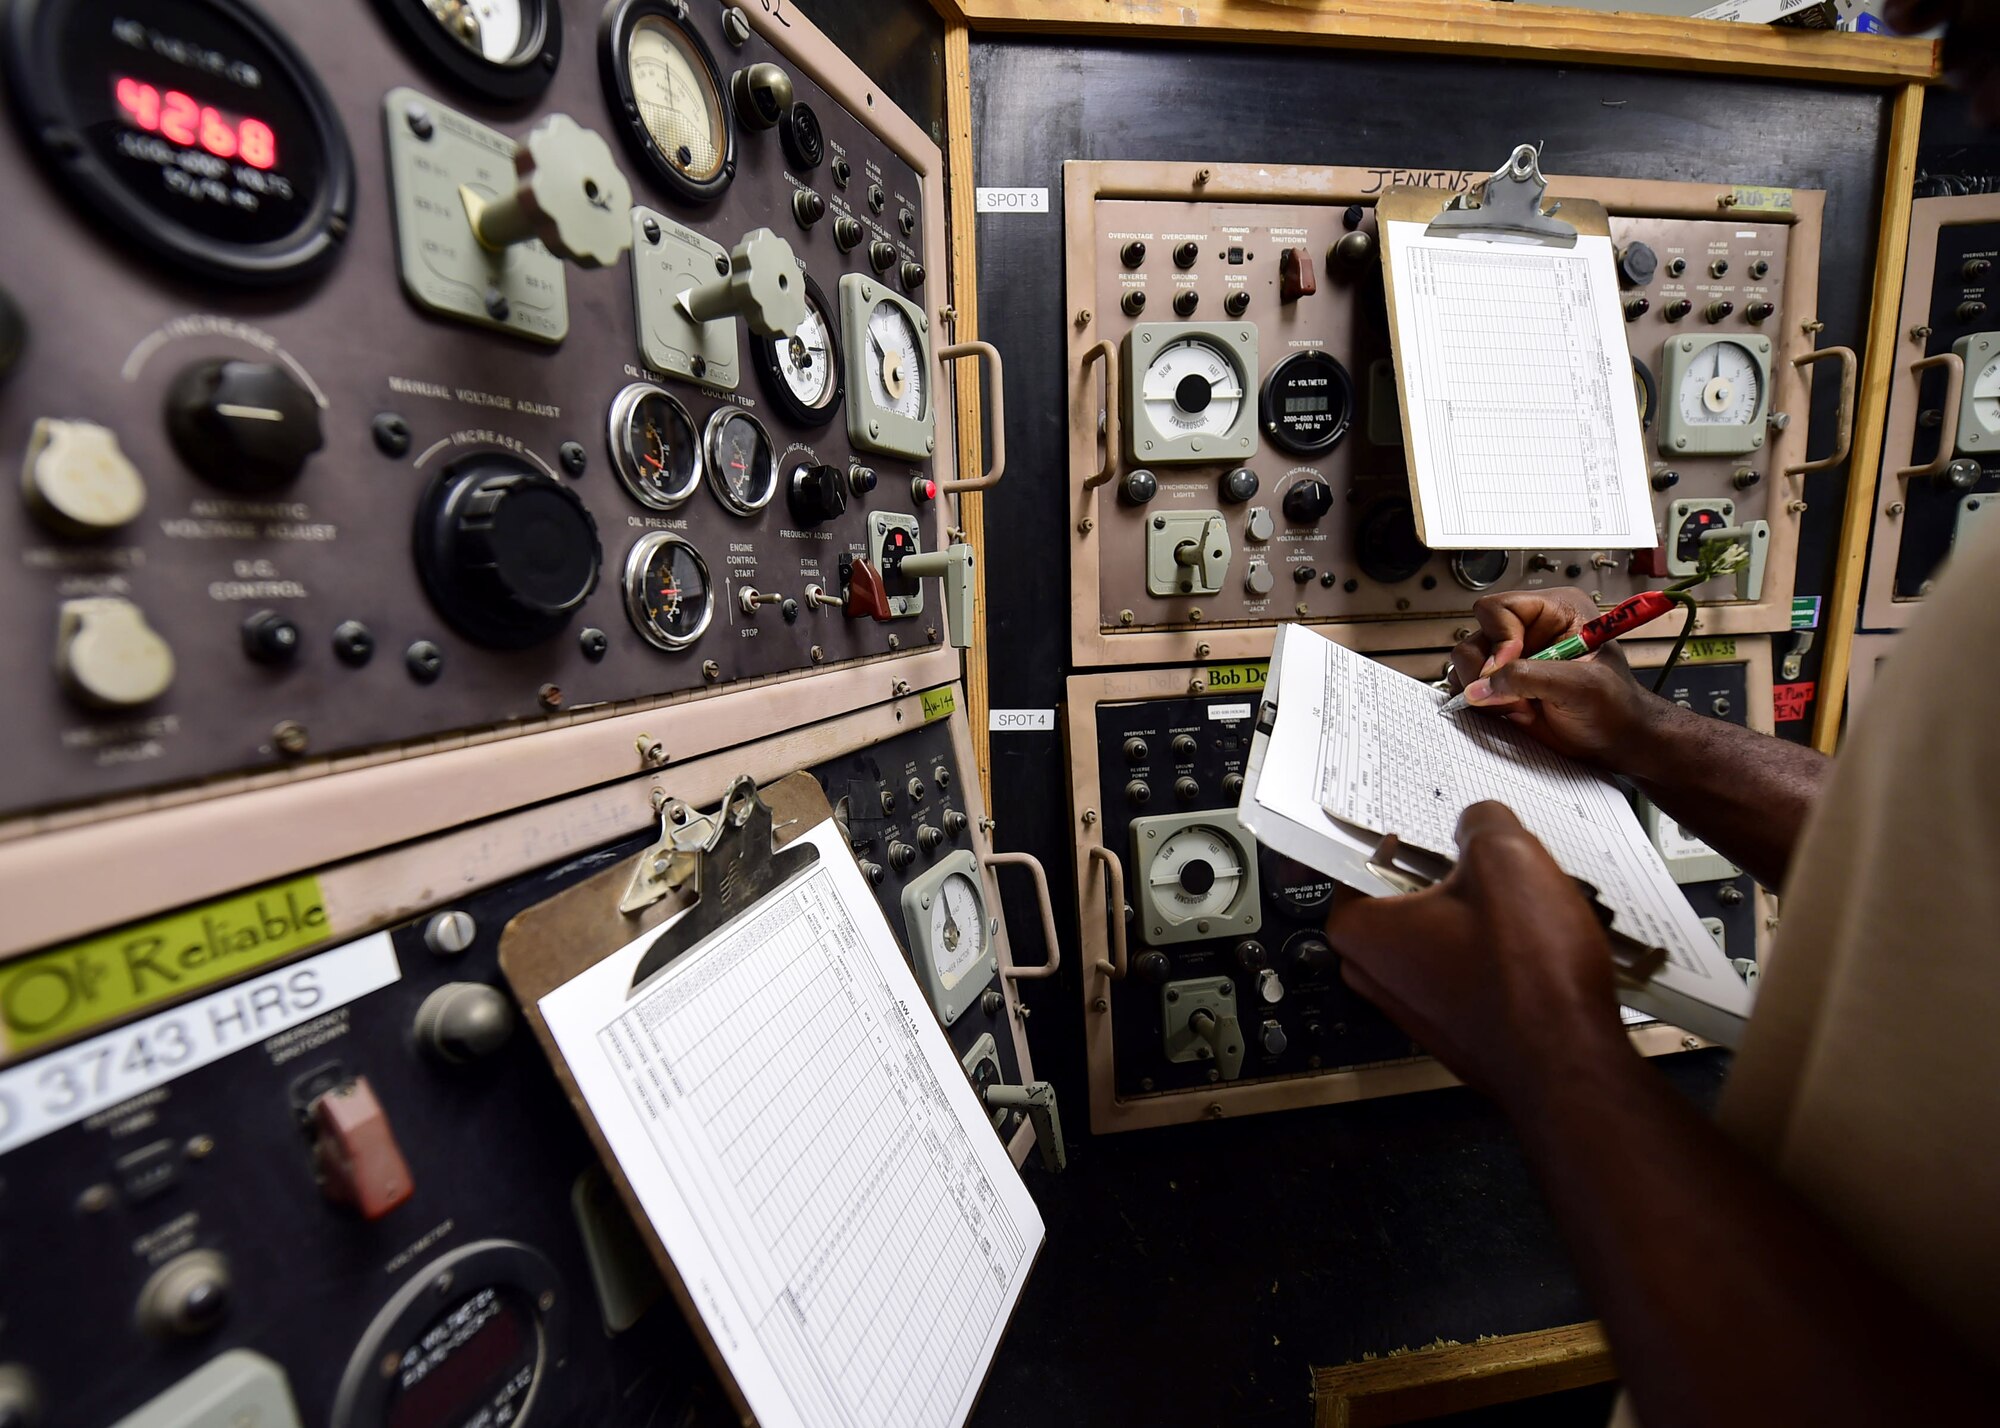 Staff Sgt. Karl Direny, a 386th Expeditionary Civil Engineer Squadron electrical power production craftsman, records a generator’s amp meter reading at an undisclosed location in Southwest Asia, Nov. 6, 2015. The power production shop operates and maintains nearly 100 generators used to provide electricity to the installation. Direny is deployed in support of Operation INHERENT RESOLVE from the 30th Civil Engineer Squadron in Vandenberg Air Force Base, California. (U.S. Air Force photo by Staff Sgt. Jerilyn Quintanilla)